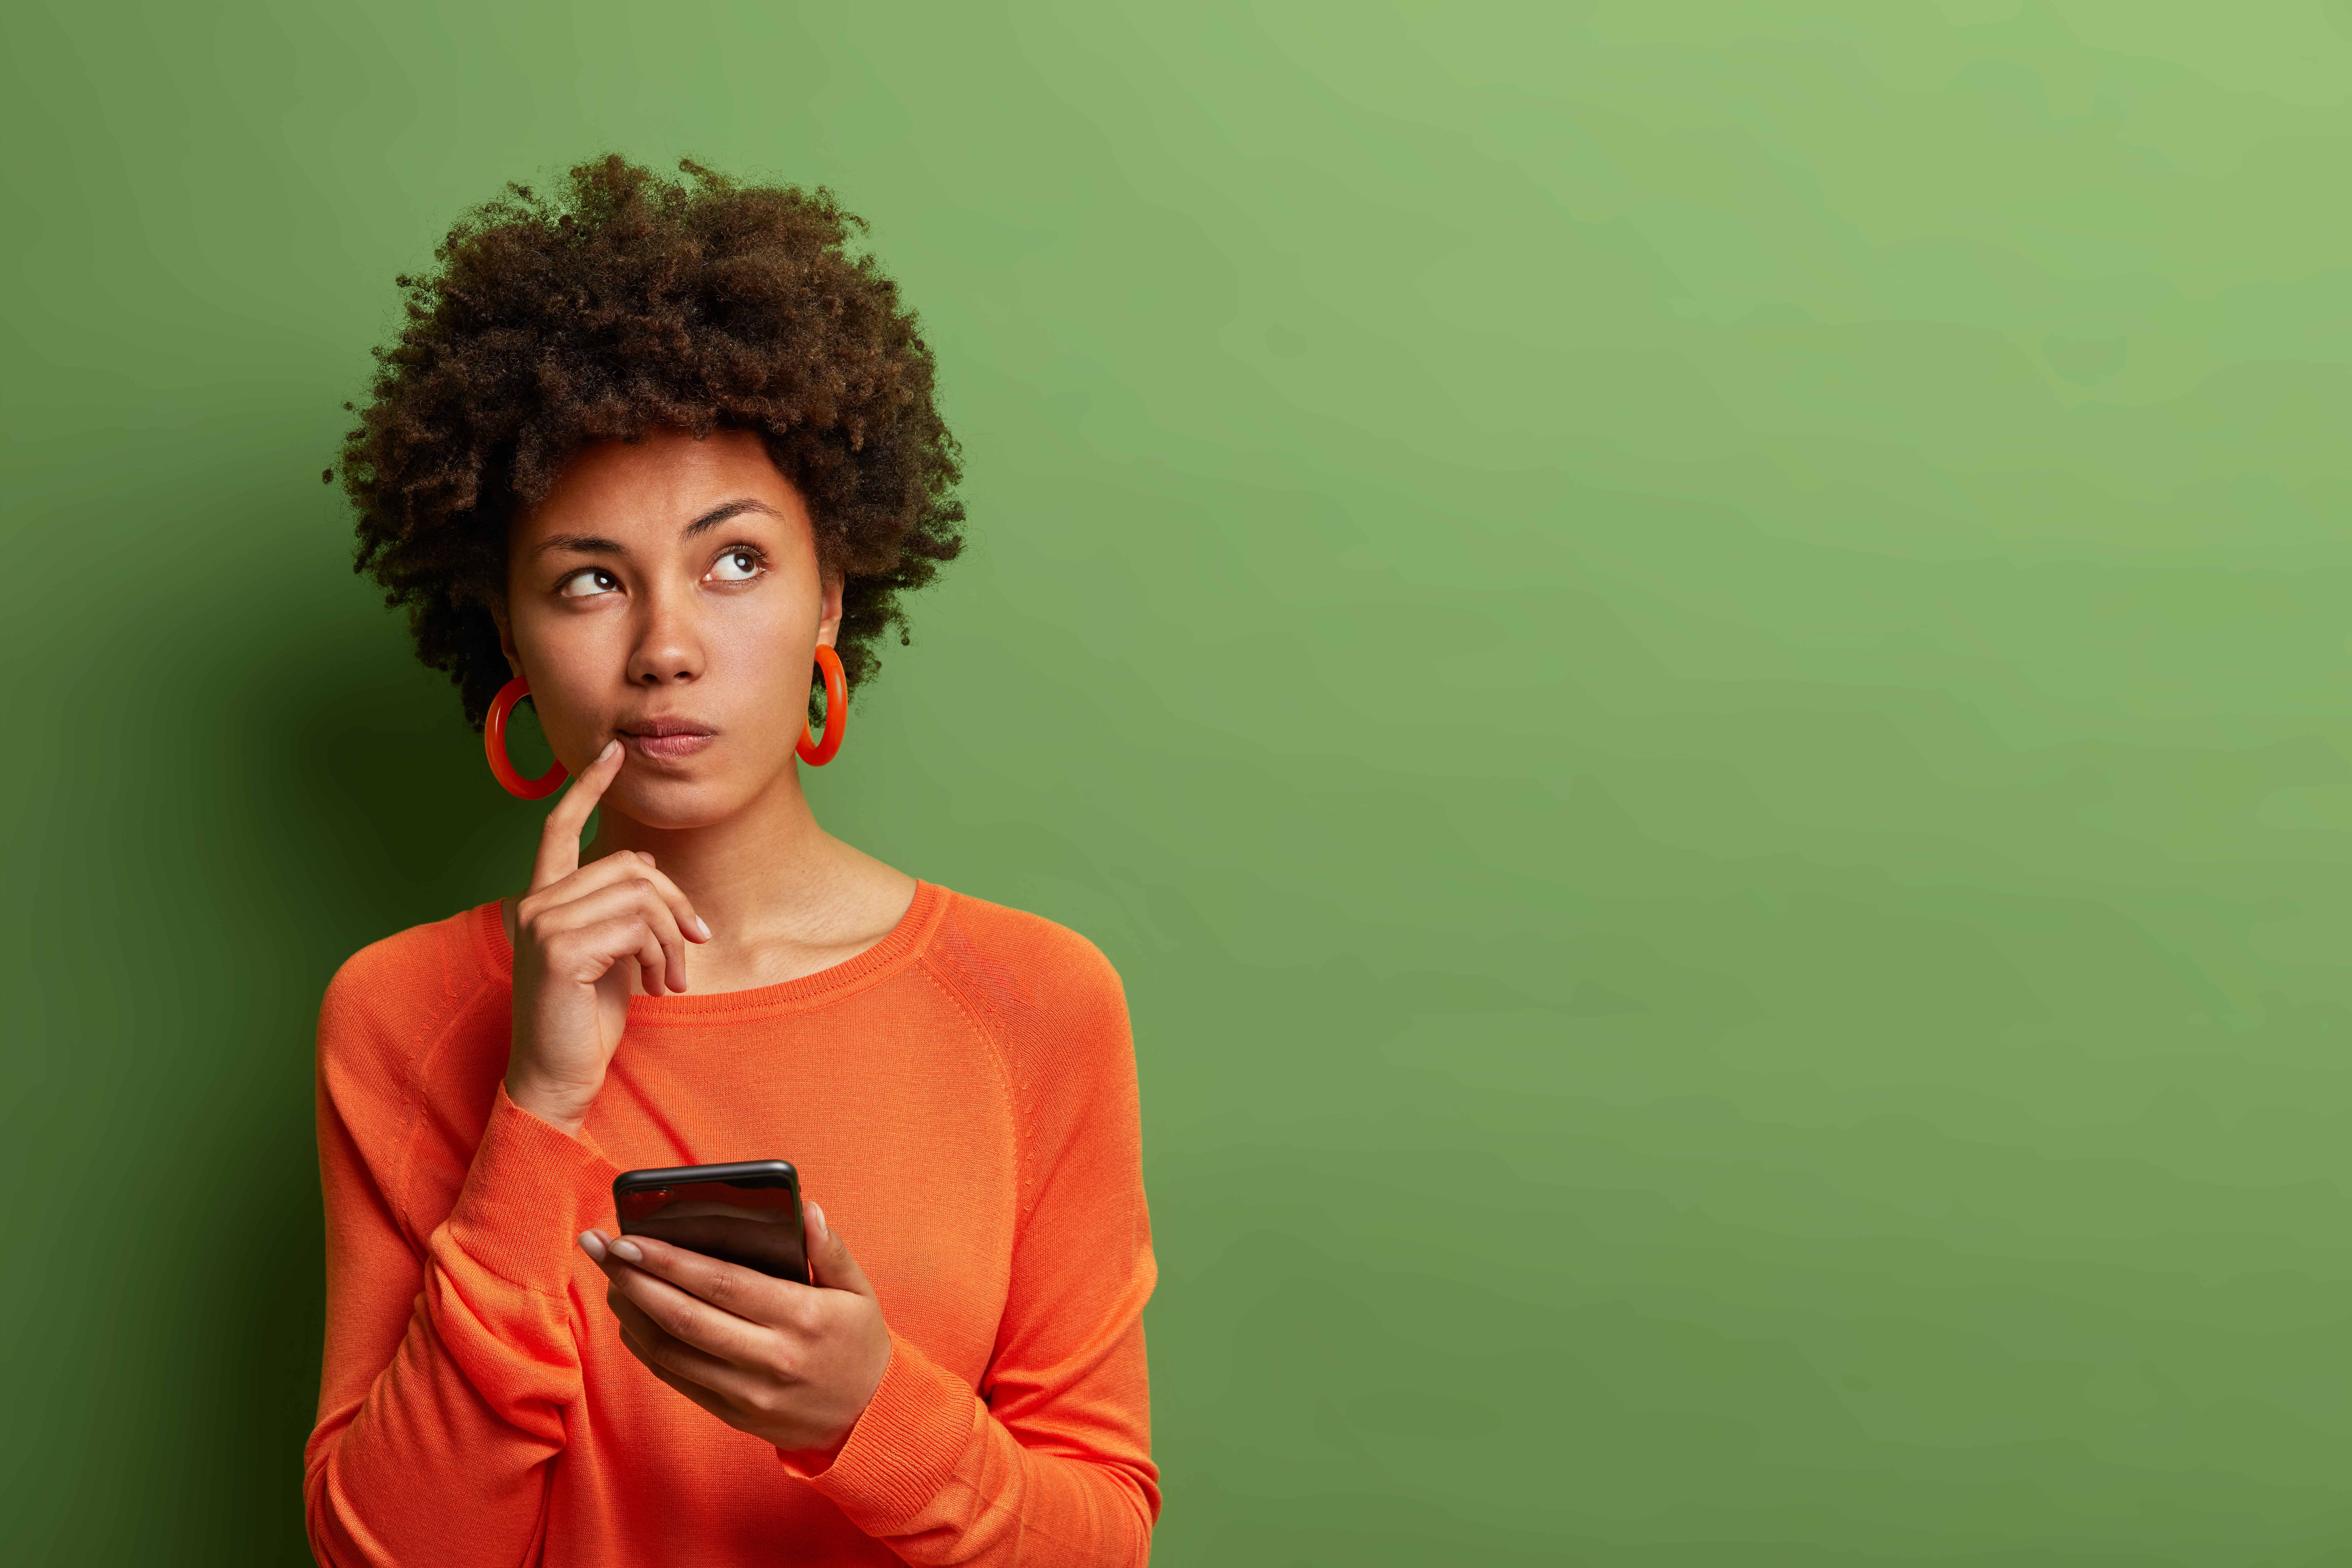 Woman thinks deeply about something and uses modern mobile phone